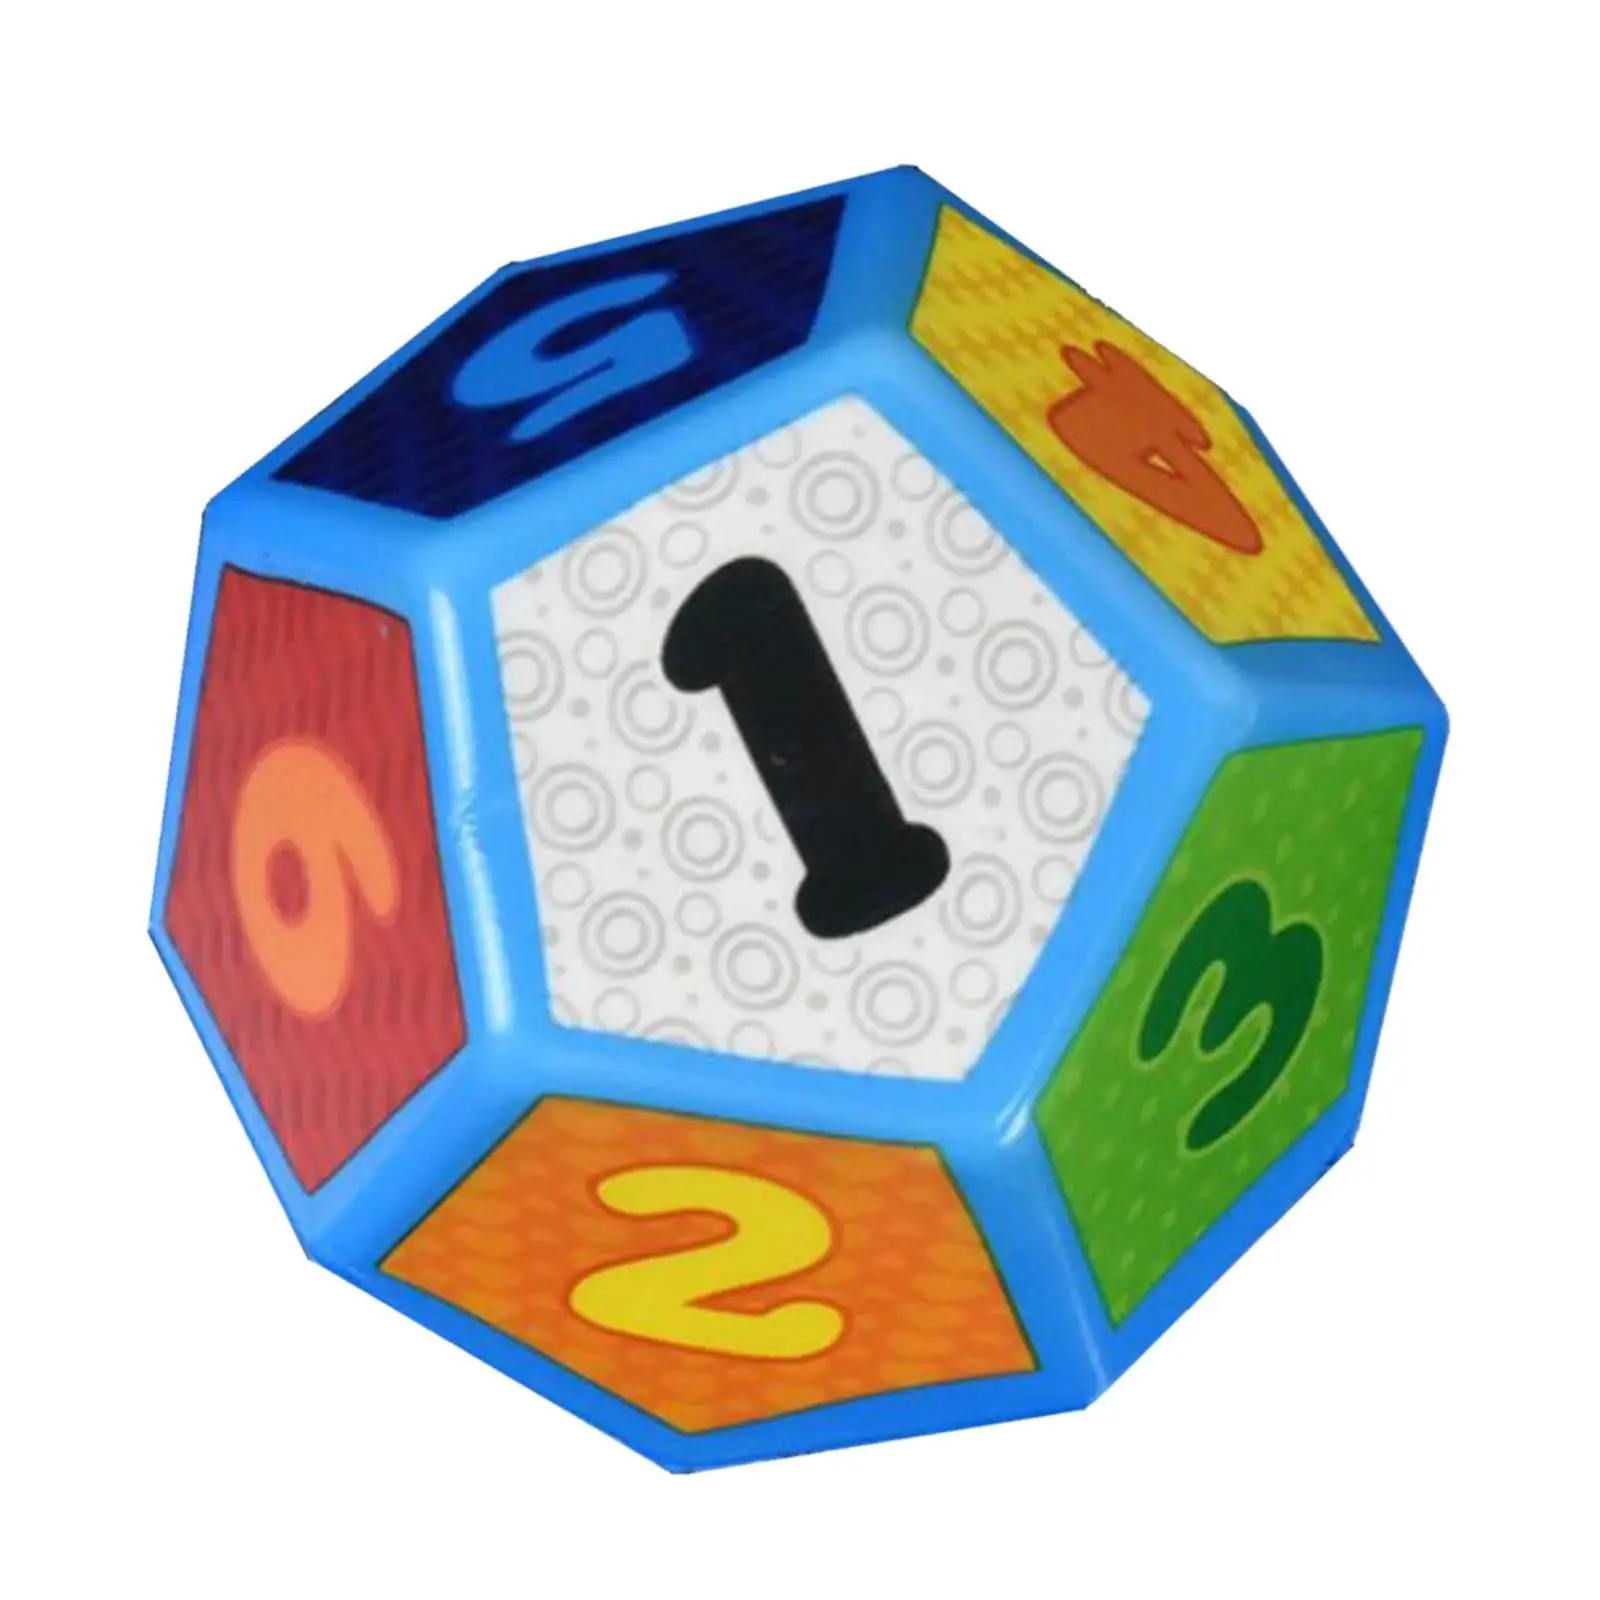 12 Sided Dice Role Playing Game Playing Learning 60G for Family Table Game